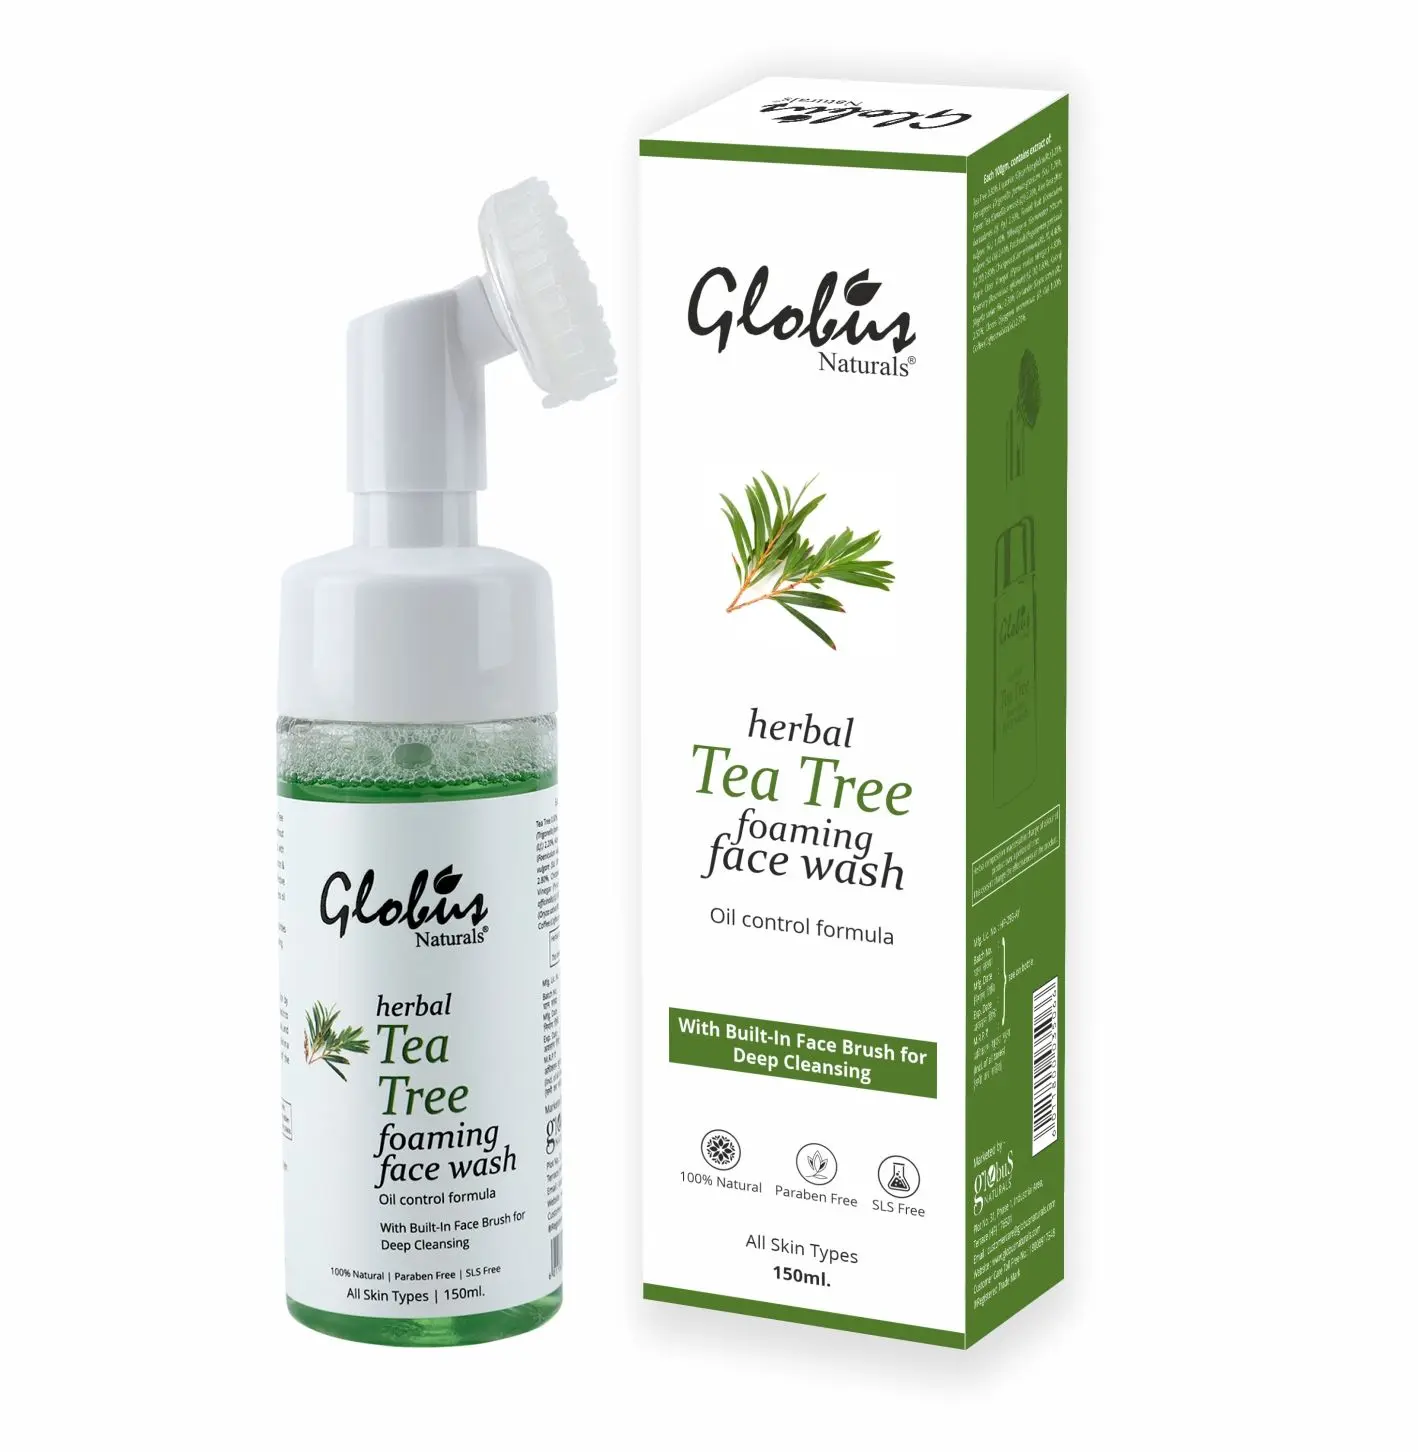 Globus Naturals Tea Tree Acne Control Foaming Face wash With Silicon Face Massage Brush (150 ml)